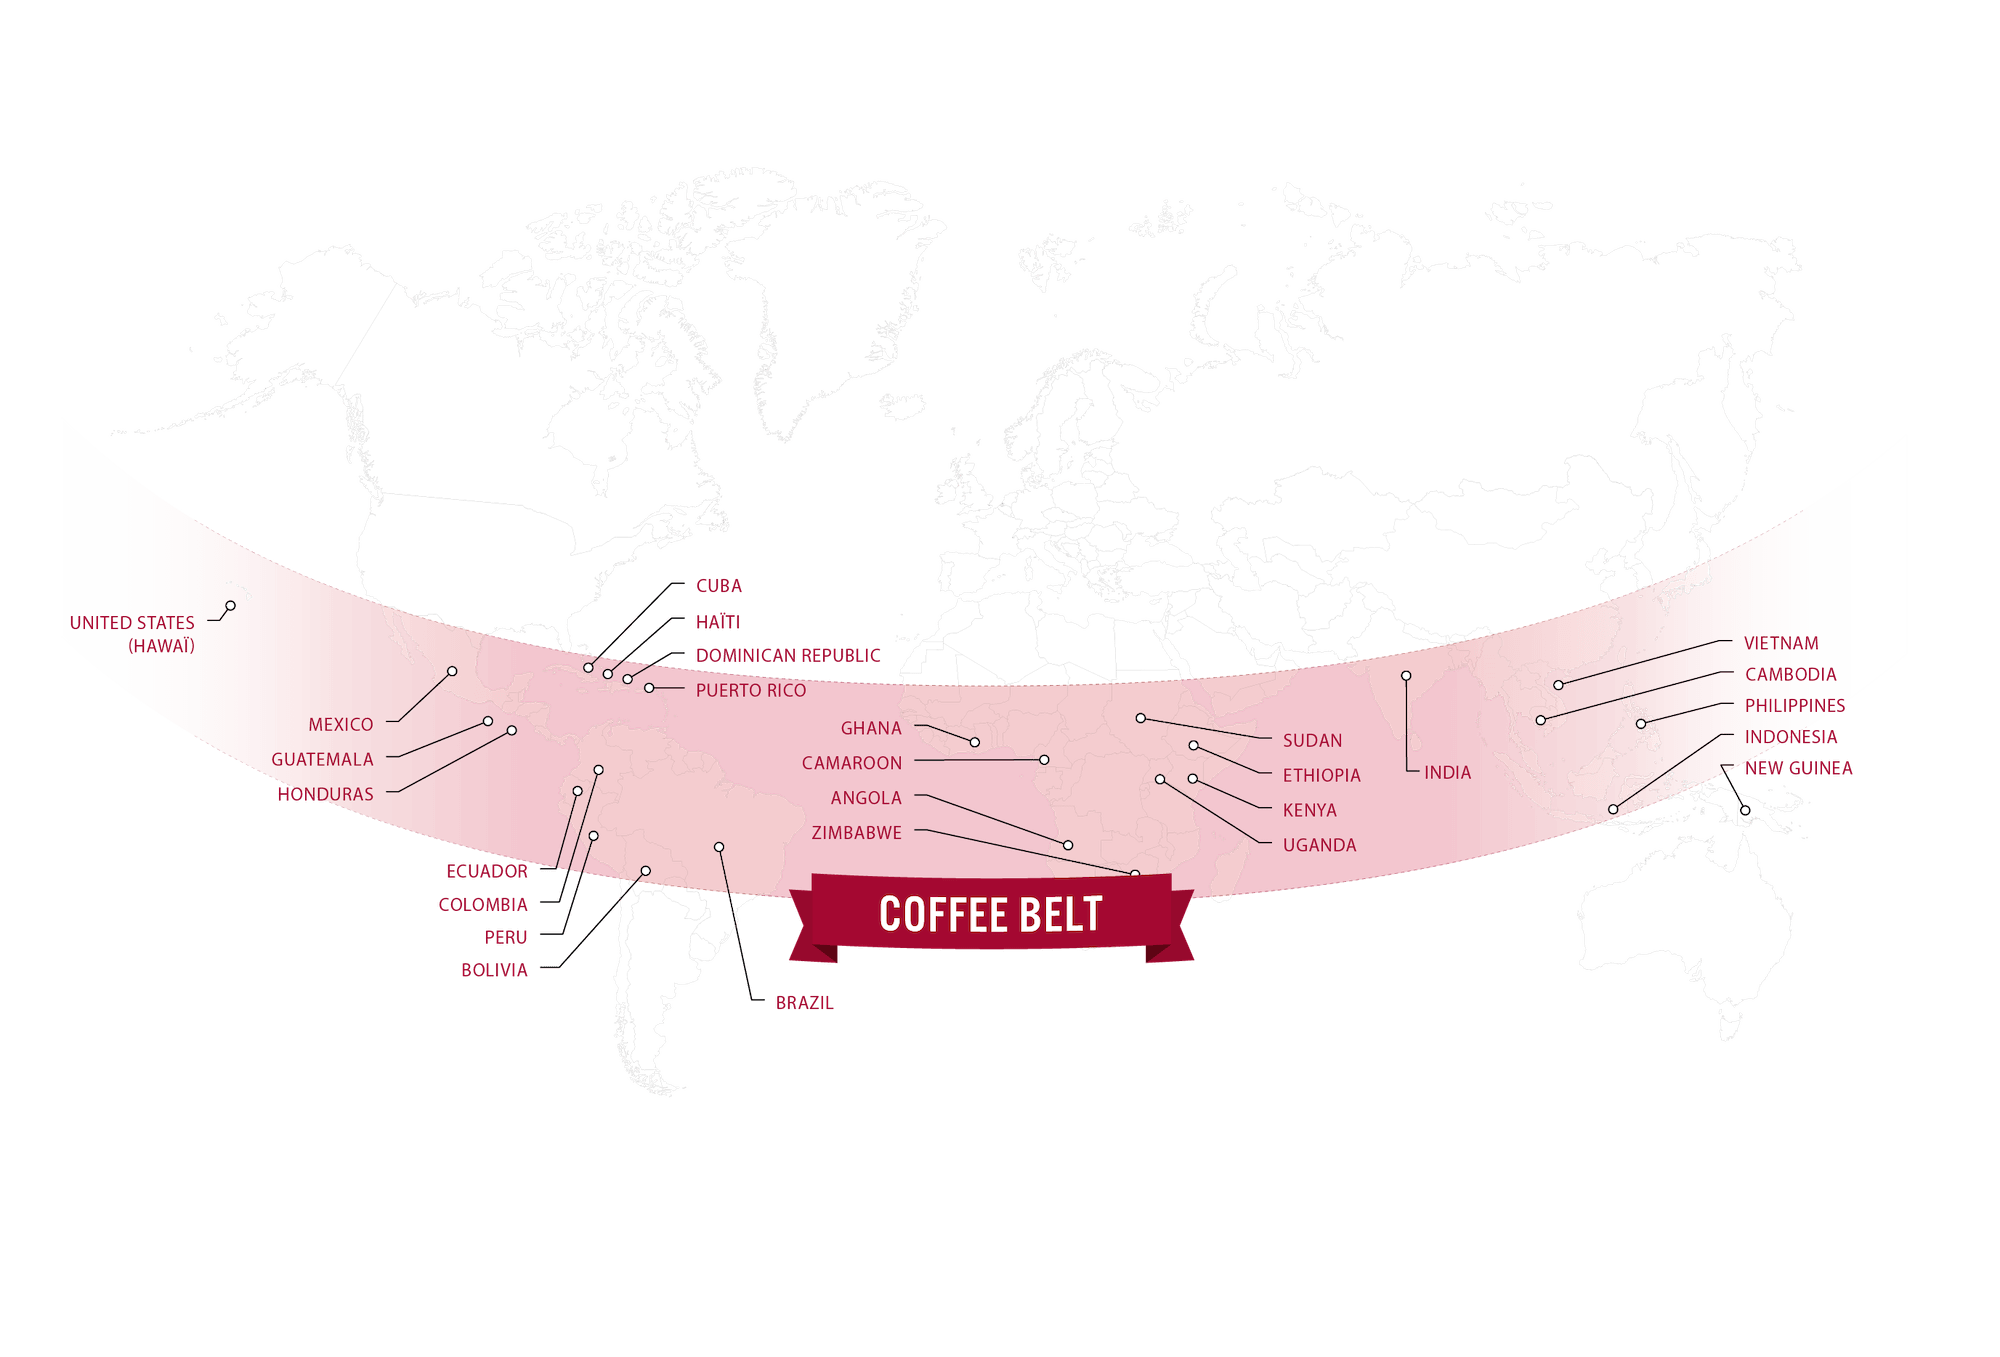 World map highlighting the cocoa belt across Africa, Central and South America, and parts of Asia